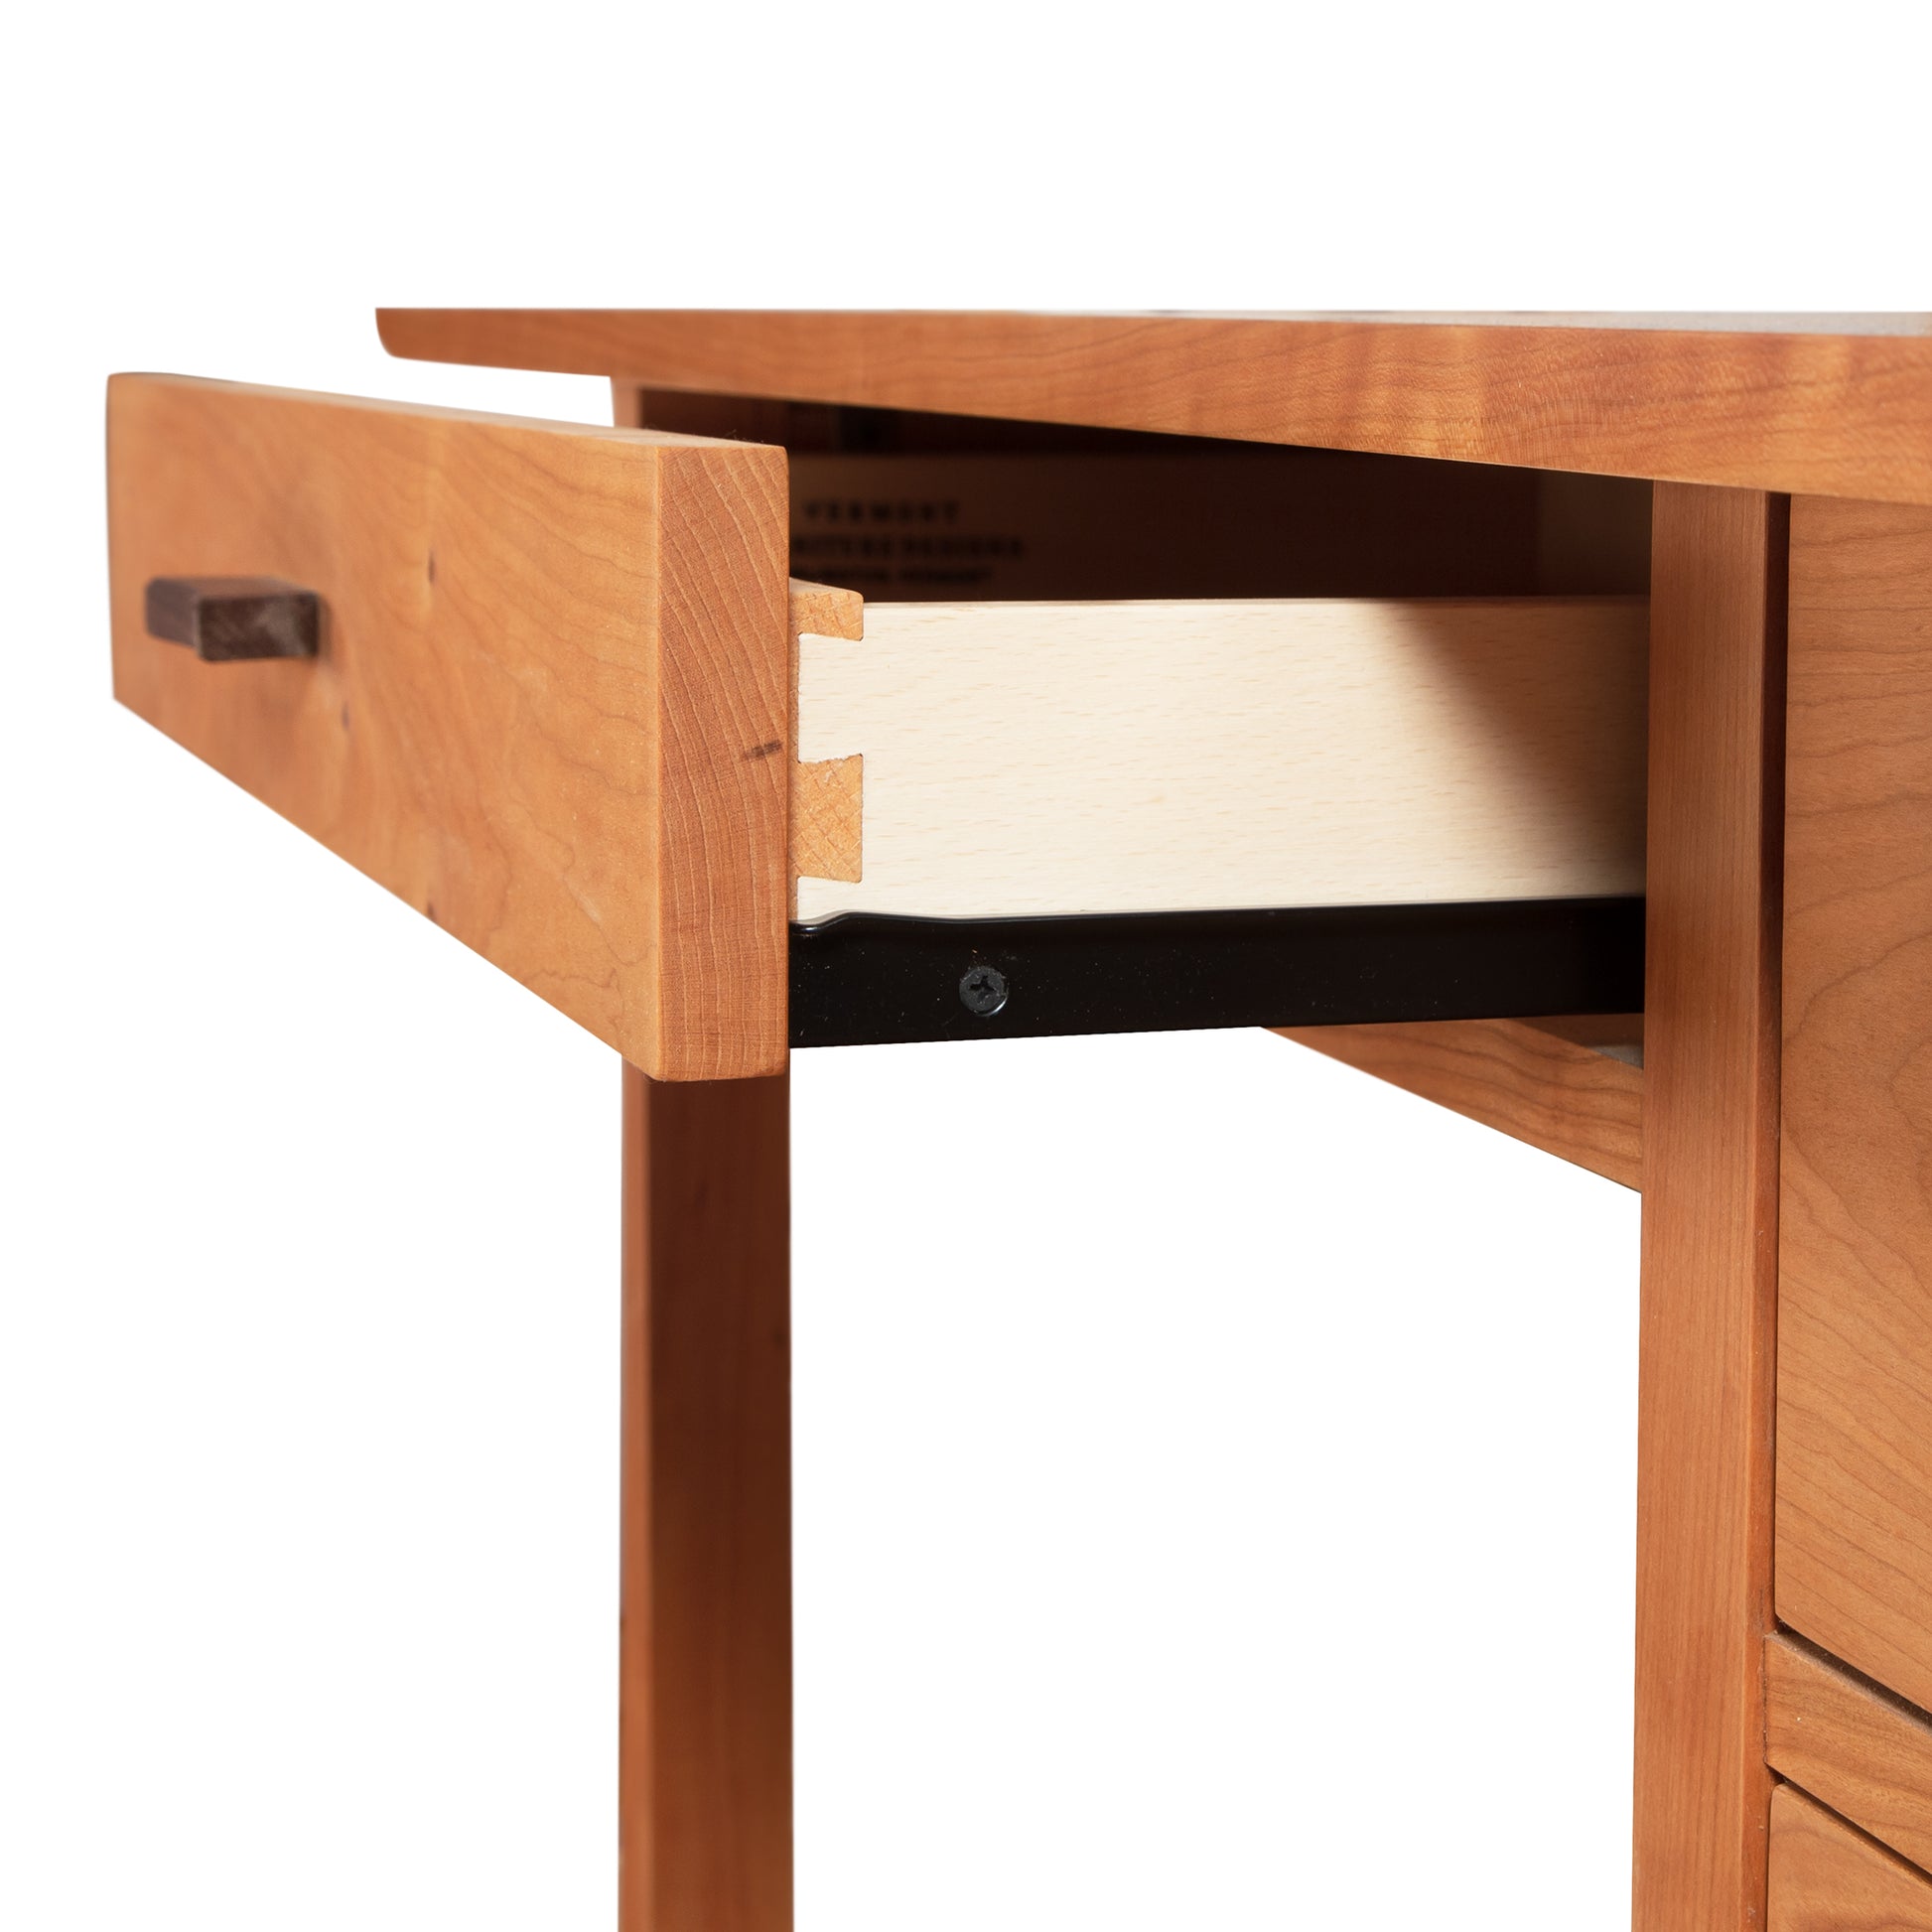 A Vermont Furniture Designs Contemporary Craftsman Study Desk made of solid wood, with a drawer under it.